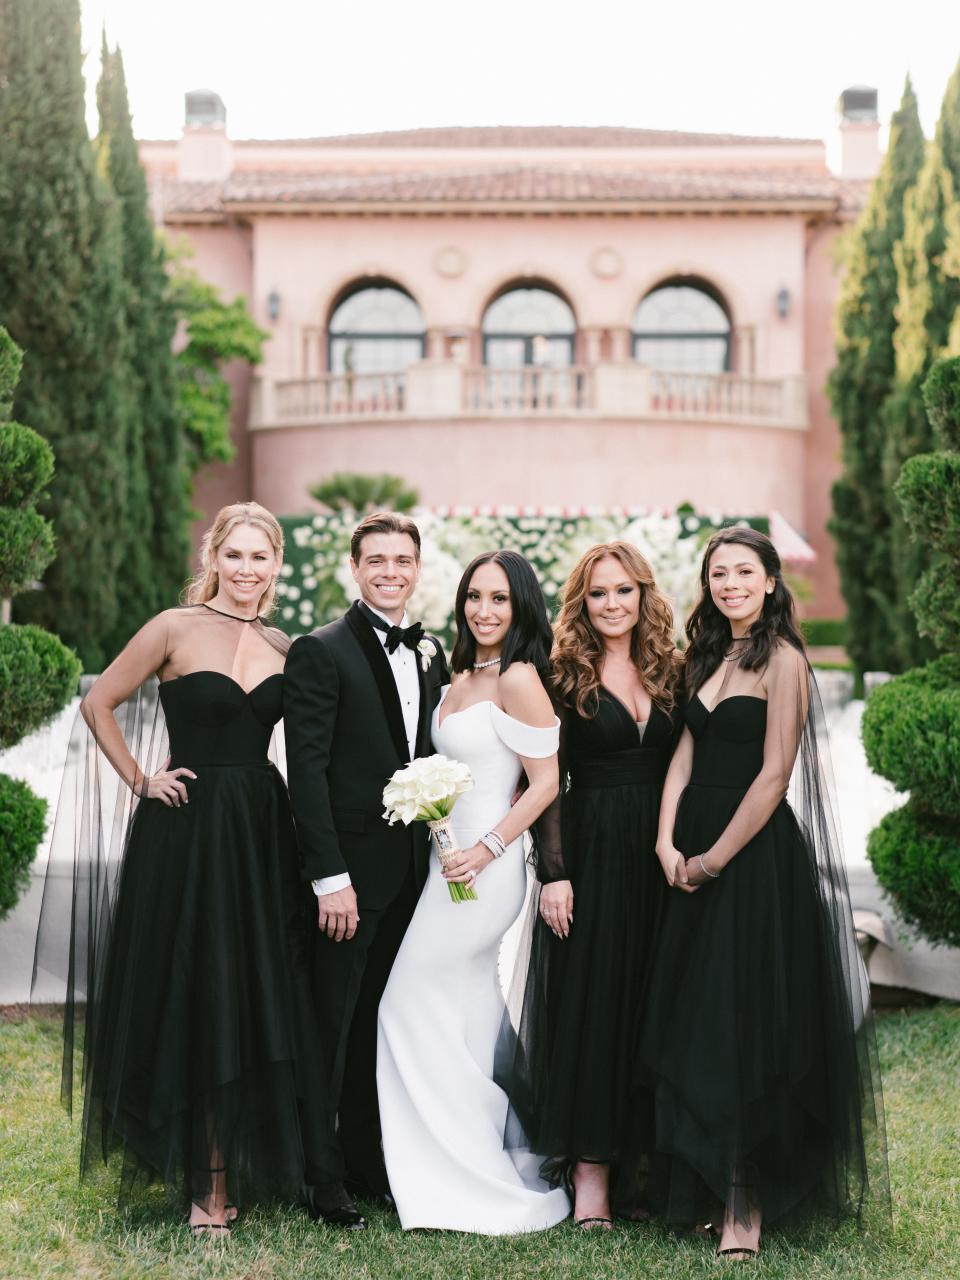 Three dress designers, a PowerPoint presentation, strict makeup rules, rhinestone Tic Tac boxes, custom flooring—<em>Dancing With the Star</em>'s Cheryl Burke had it all, and more. Here she explains why seeking perfection on your wedding day gets a bad rap.